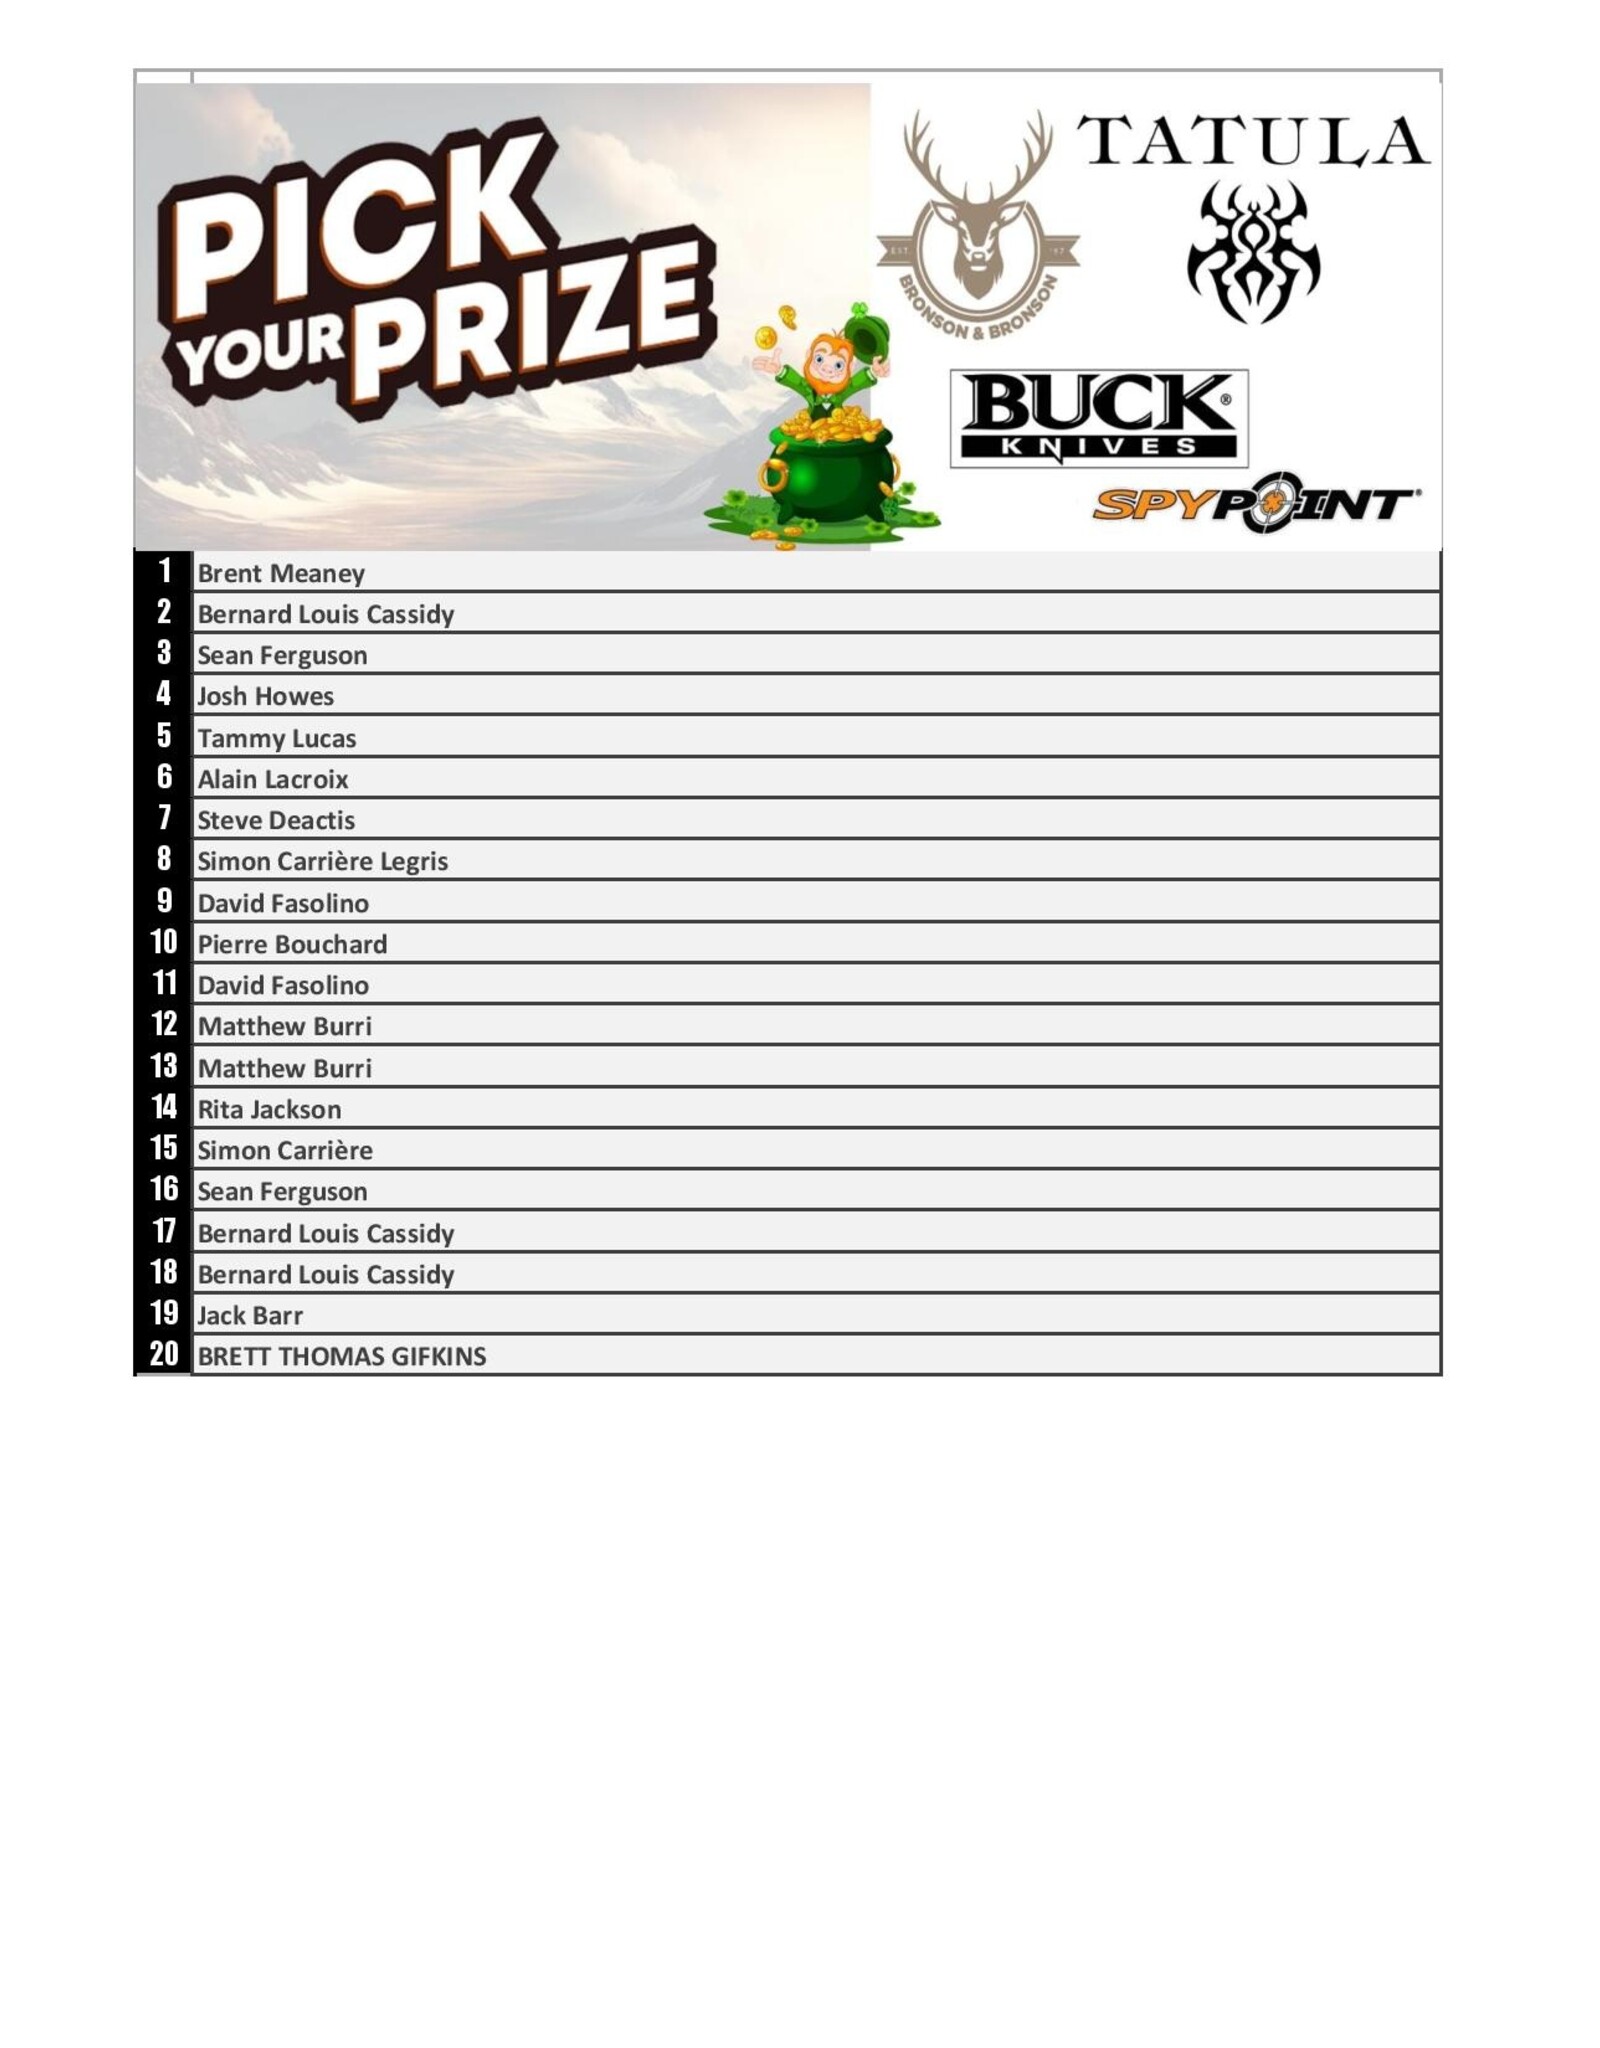 DRAW #1309 - Pick Your Prize - Buck, Tatula, SpyPoint OR Gift Card